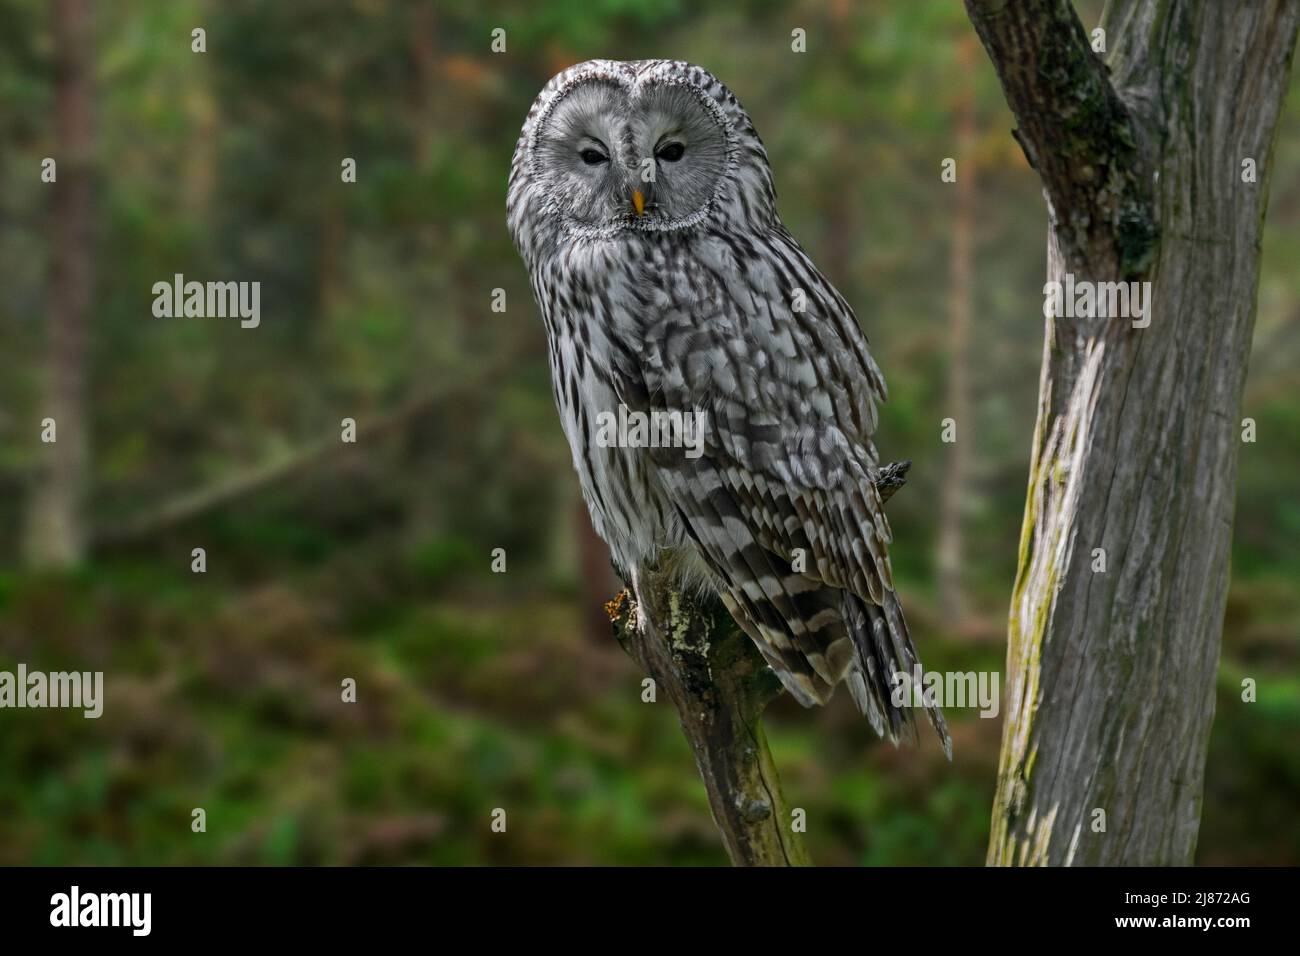 Ural owl (Strix uralensis) perched in tree in coniferous forest, native to Scandinavia, montane eastern Europe and Russia Stock Photo